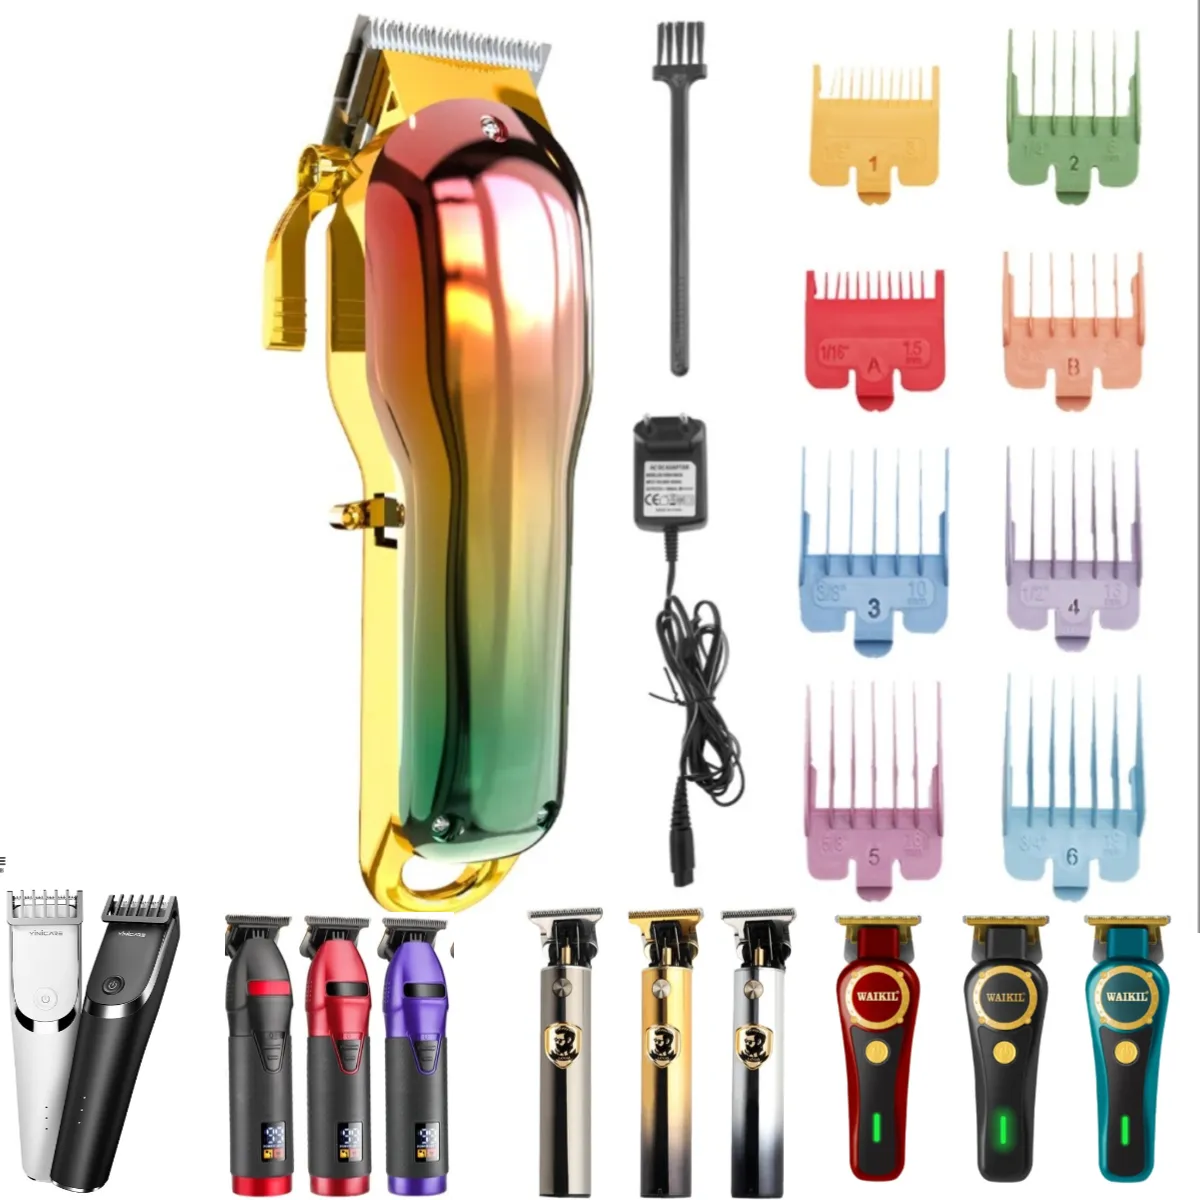 Hair Clippers For Hair Application Trimmer Bread Shaver Machine Beauty Type Electric Razors